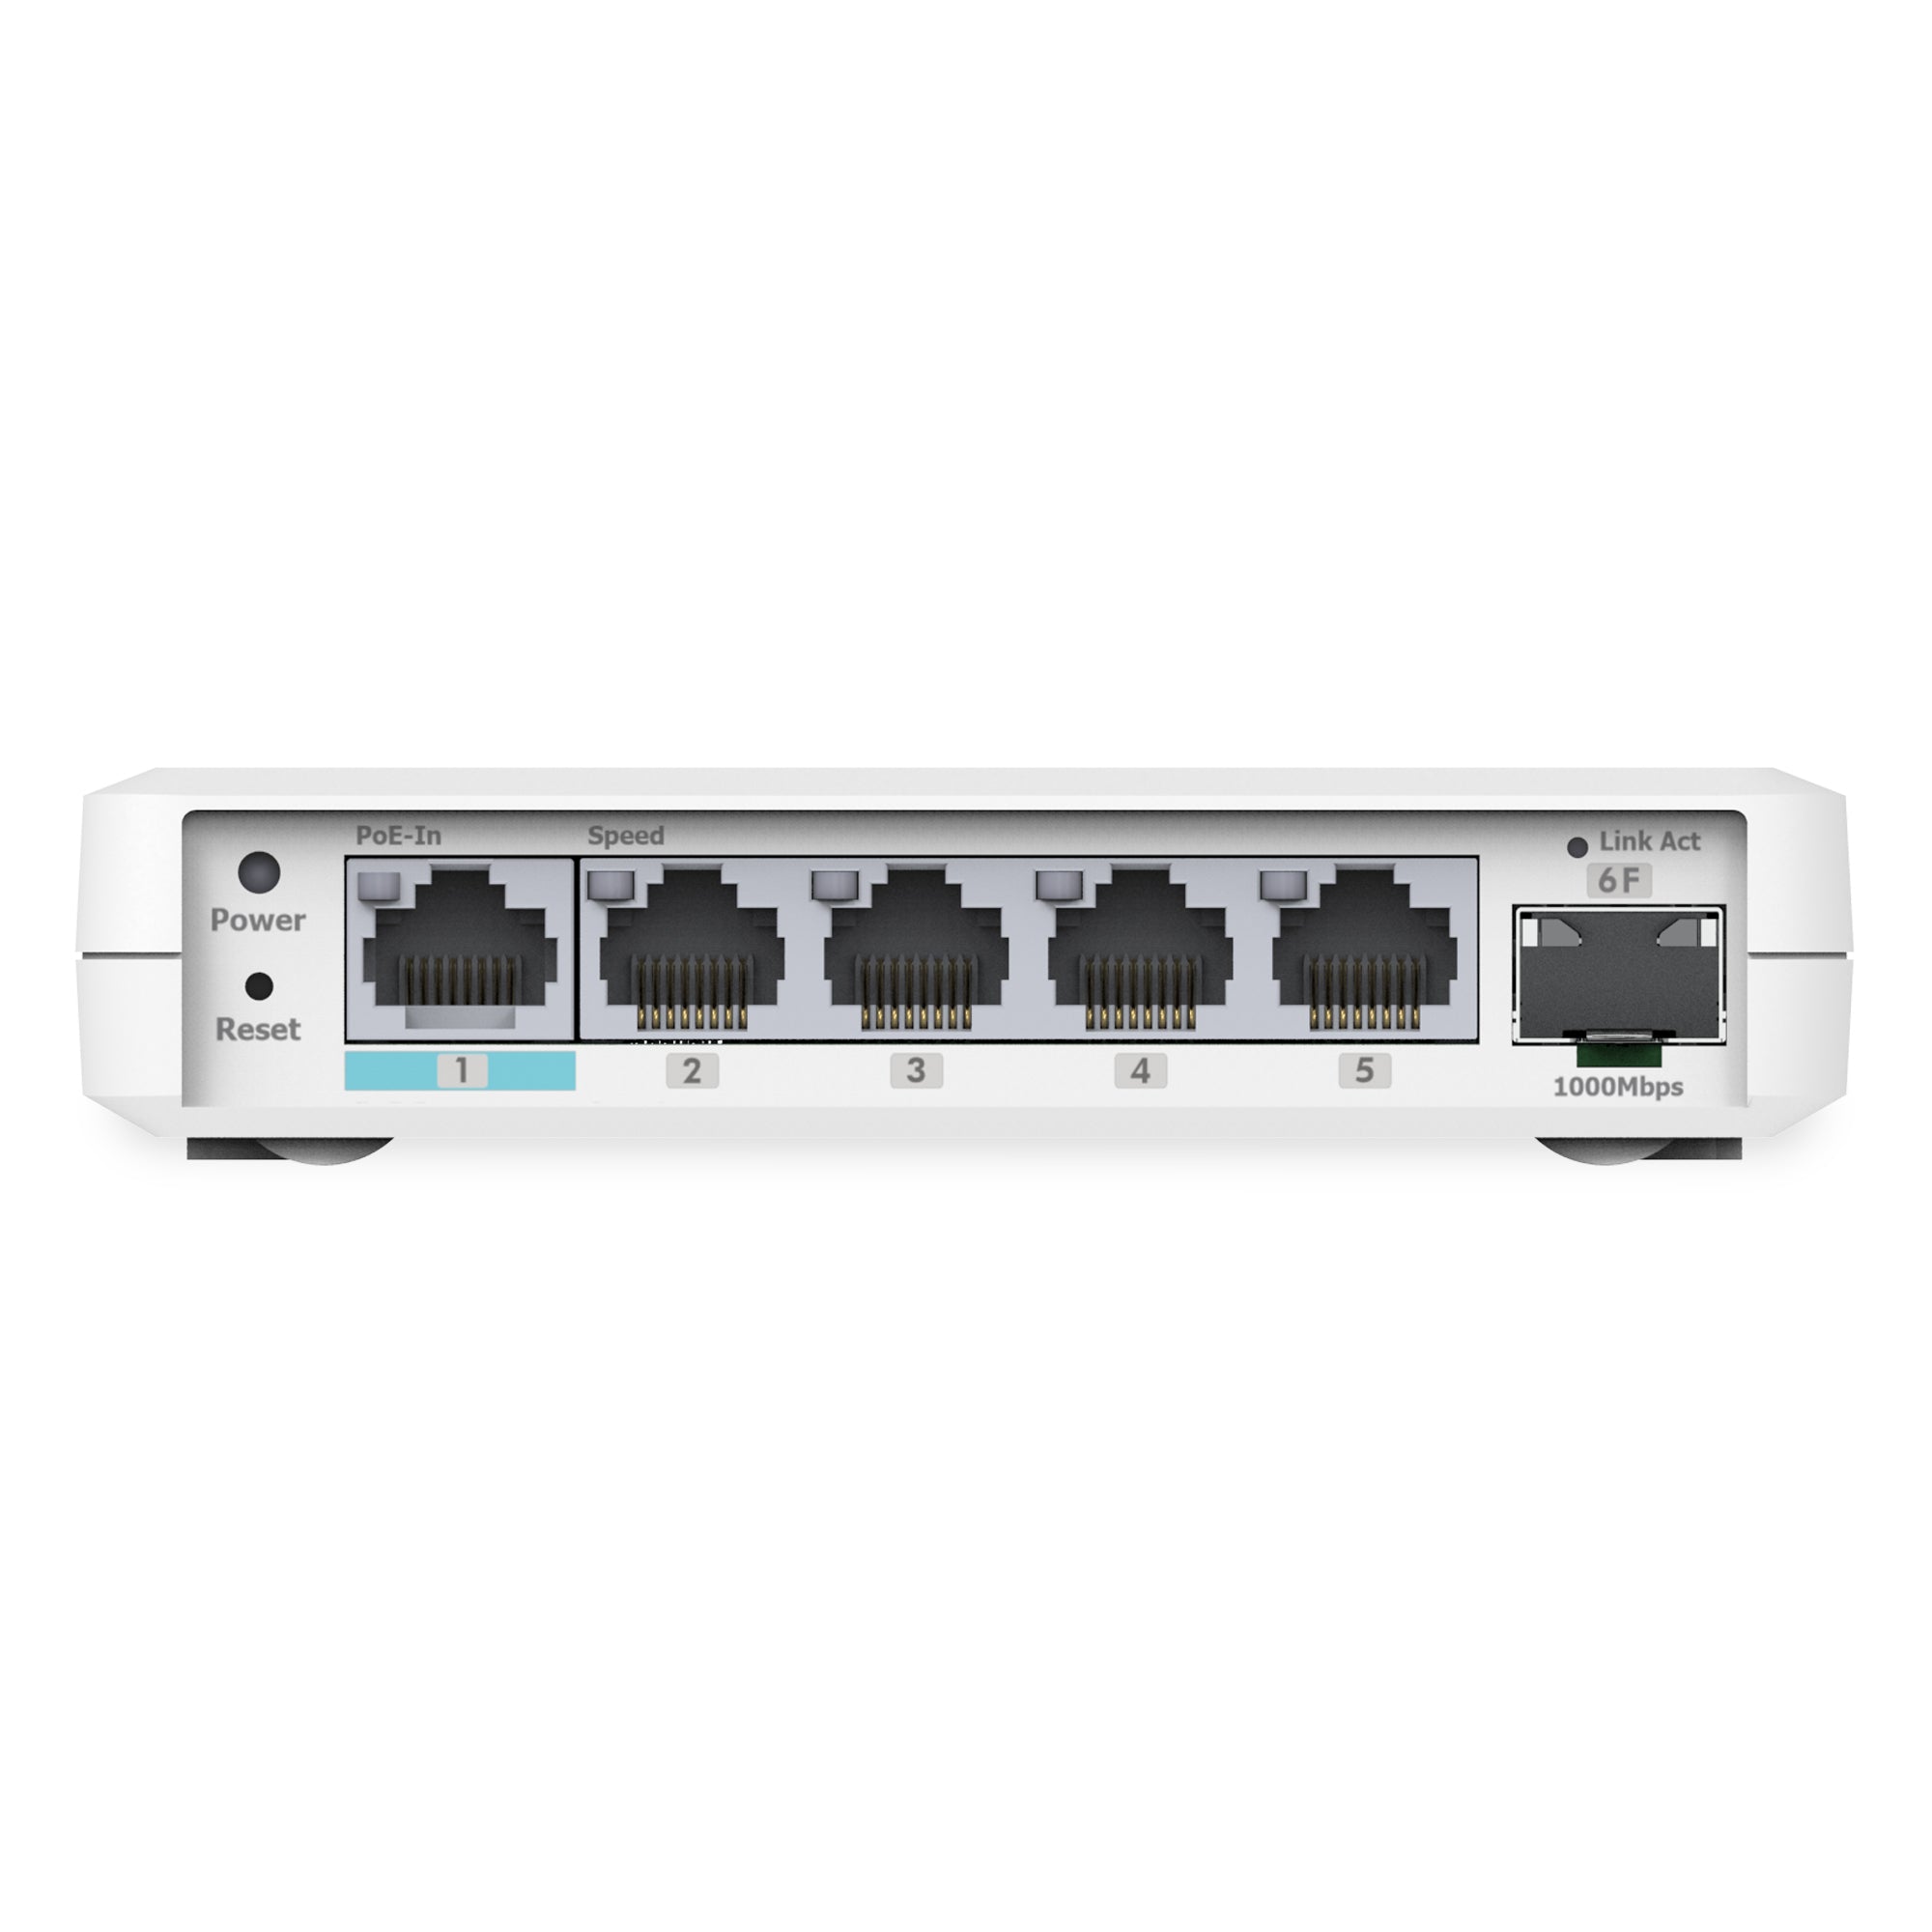 EXT1106: Cloud Managed EXT1106 5-Port Gigabit Switch Extender and 1 SFP slot